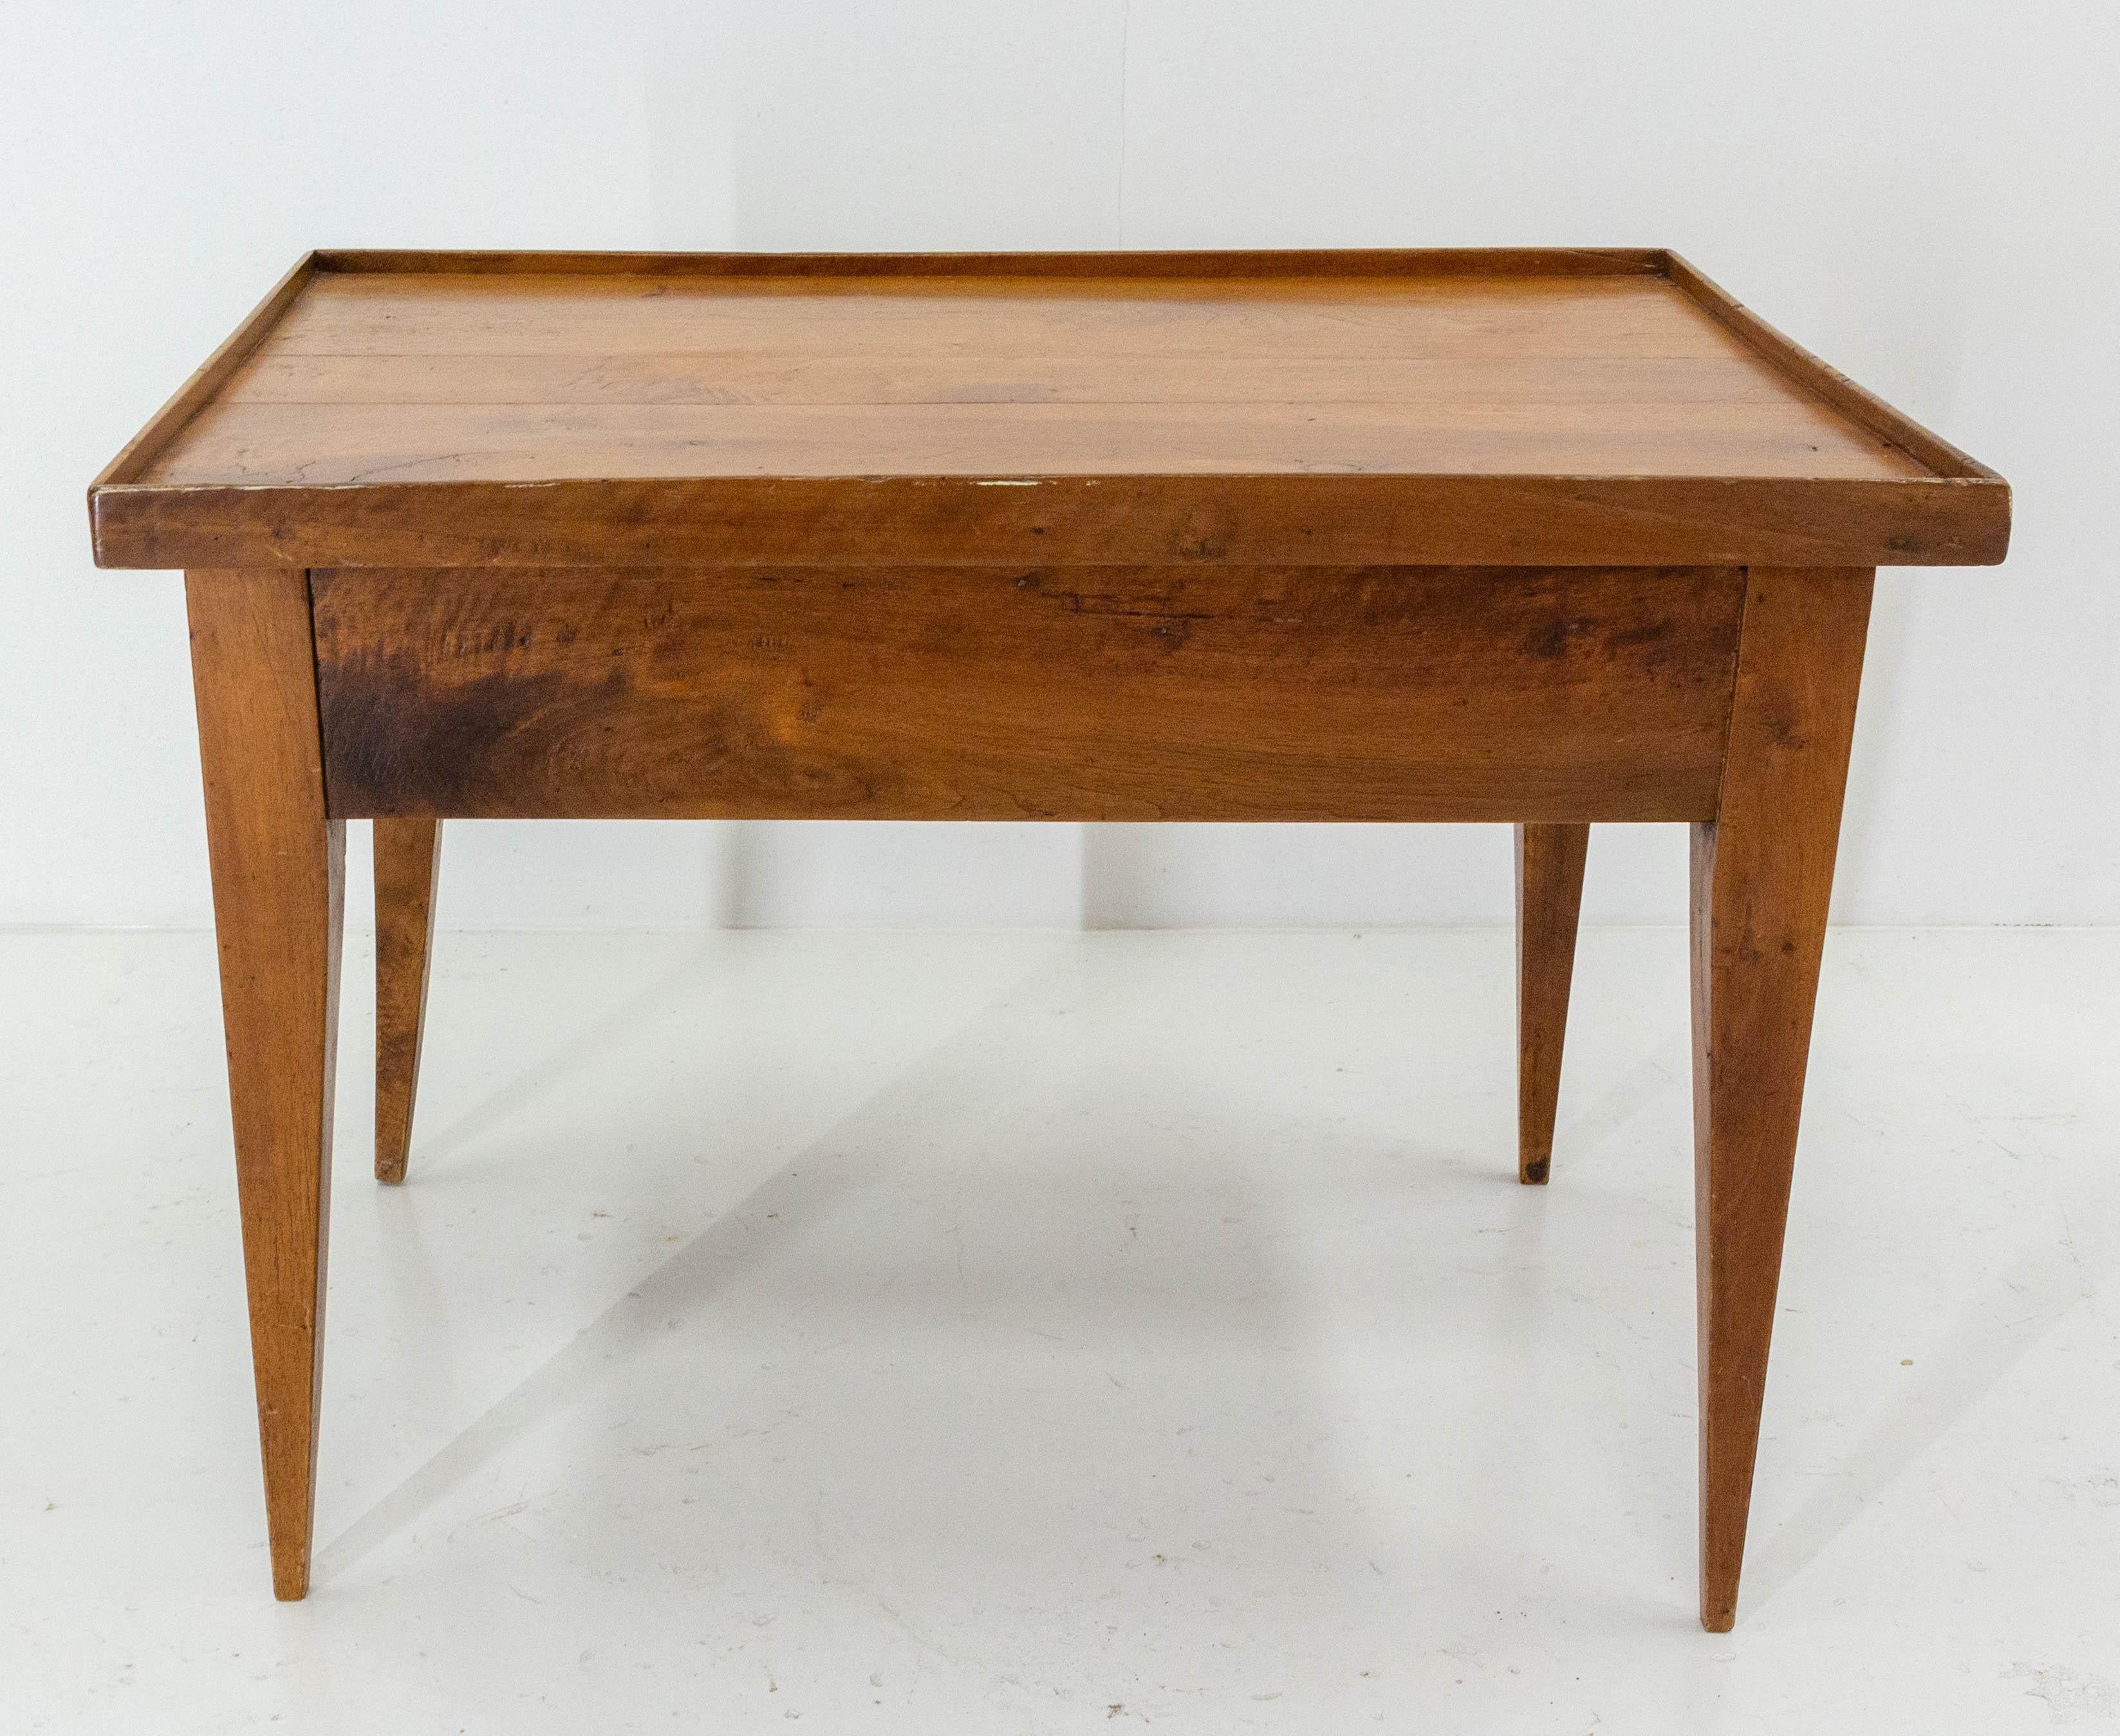 French Cherrywood Coffee Table with Drawers Country Style, Late 19th Century For Sale 2